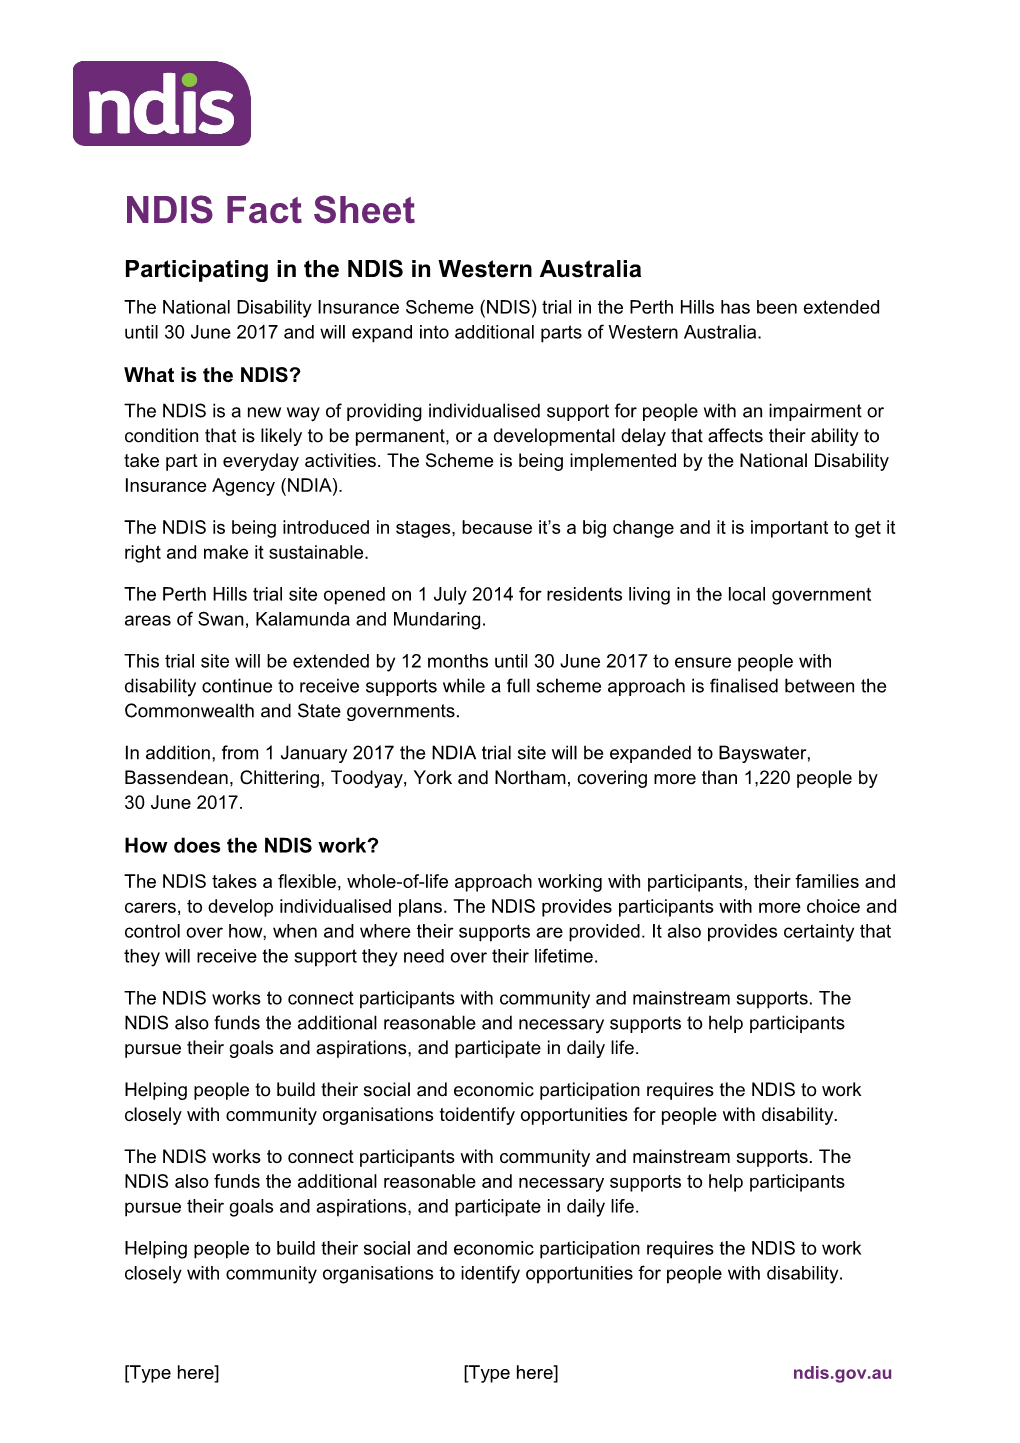 NDIS Factsheet: Participating in the NDIS in Western Australia